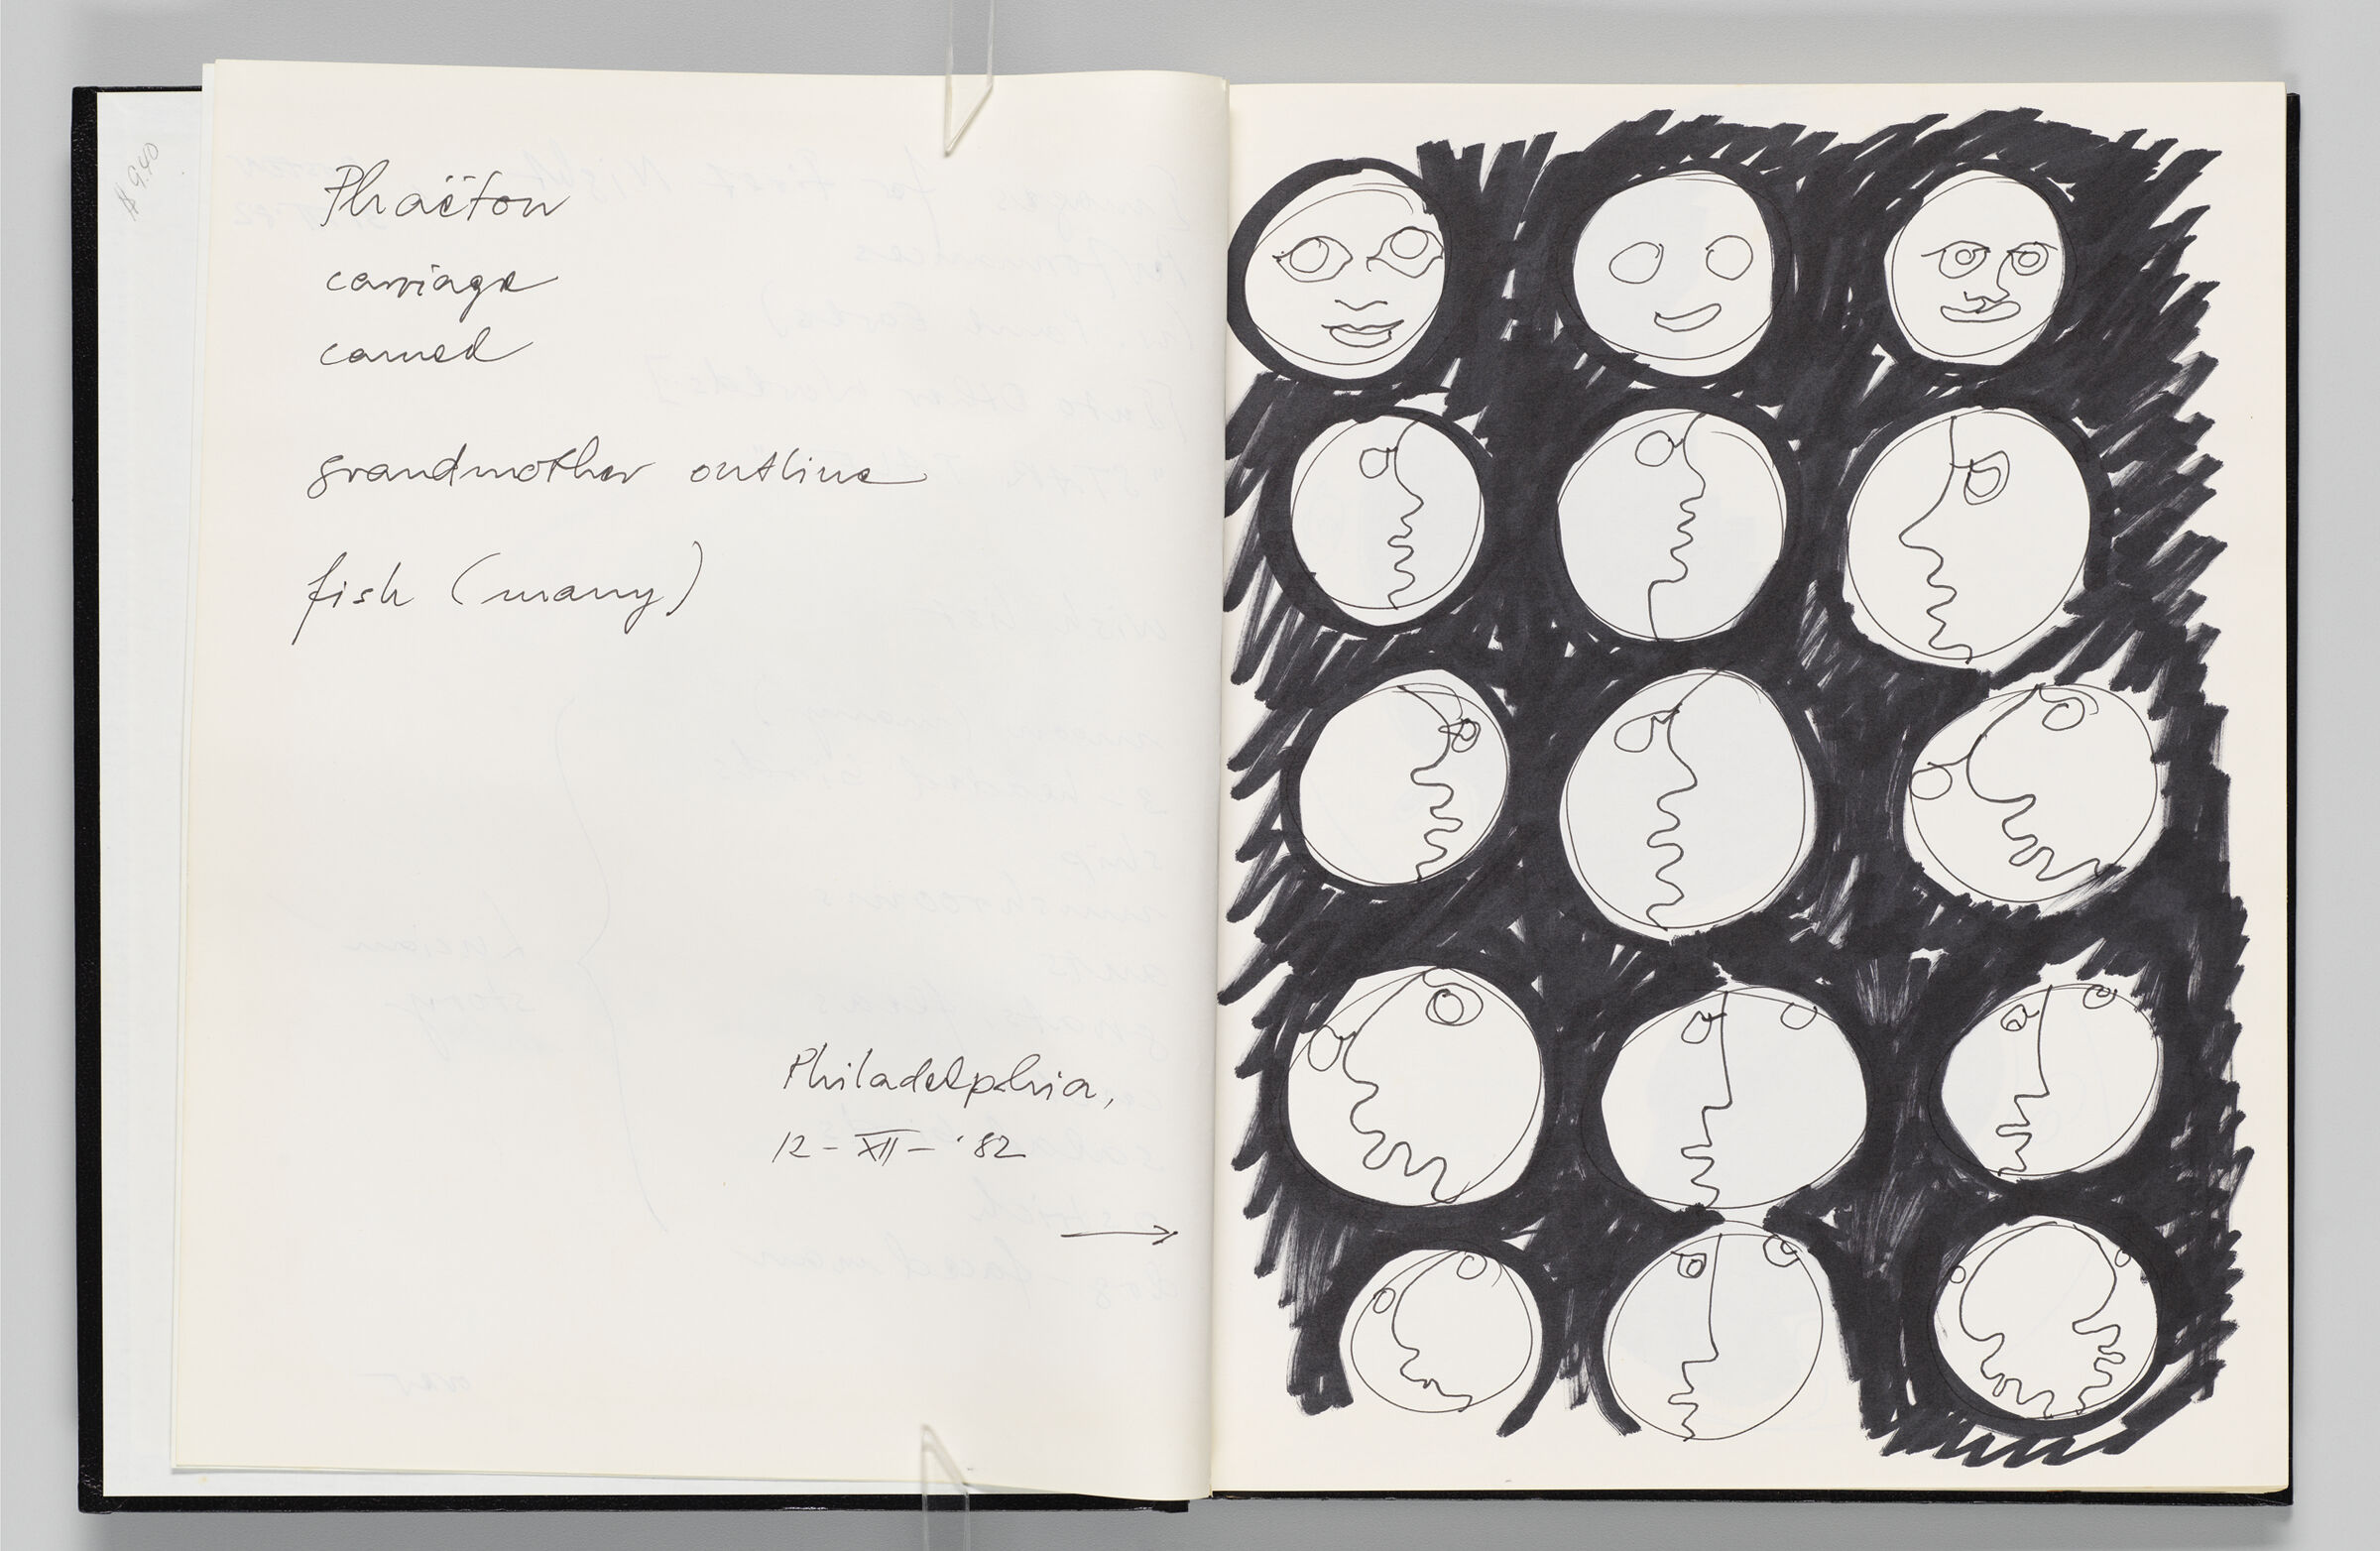 Untitled (Bleed-Through Of Previous Page And Notes, Left Page); Untitled (Moon Faces, Right Page)